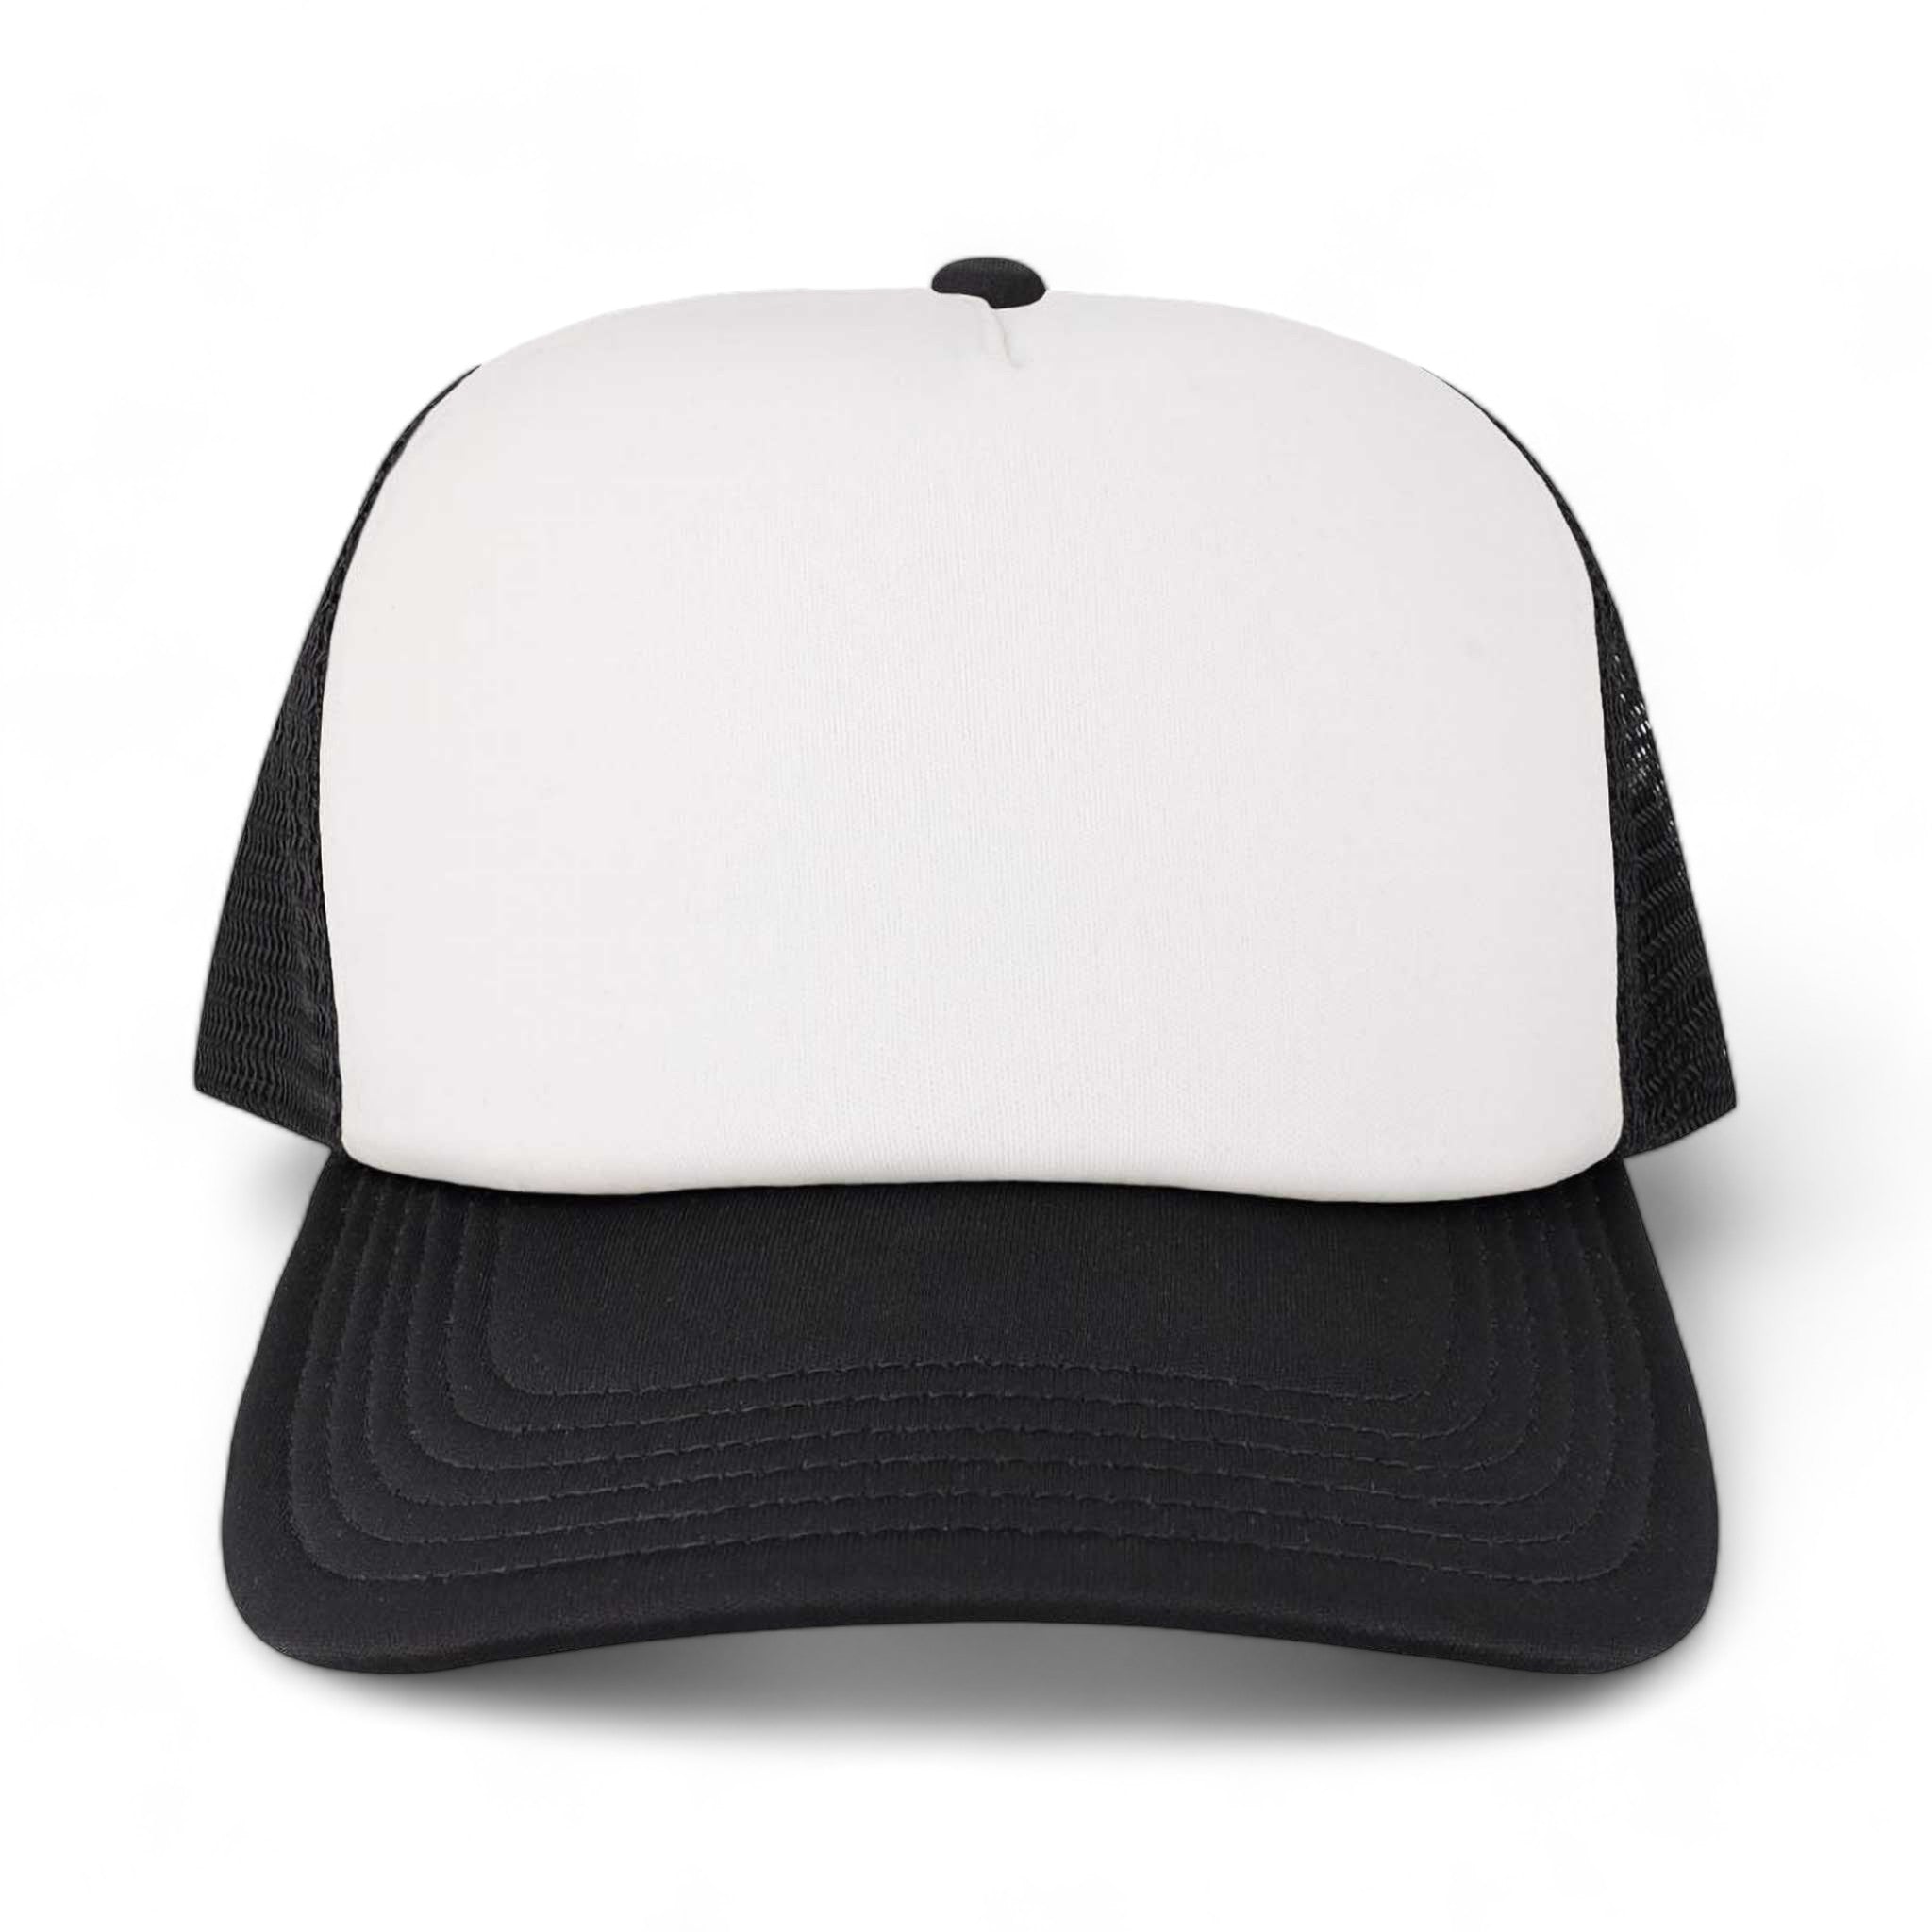 Front view of LEGACY LTA custom hat in white and black